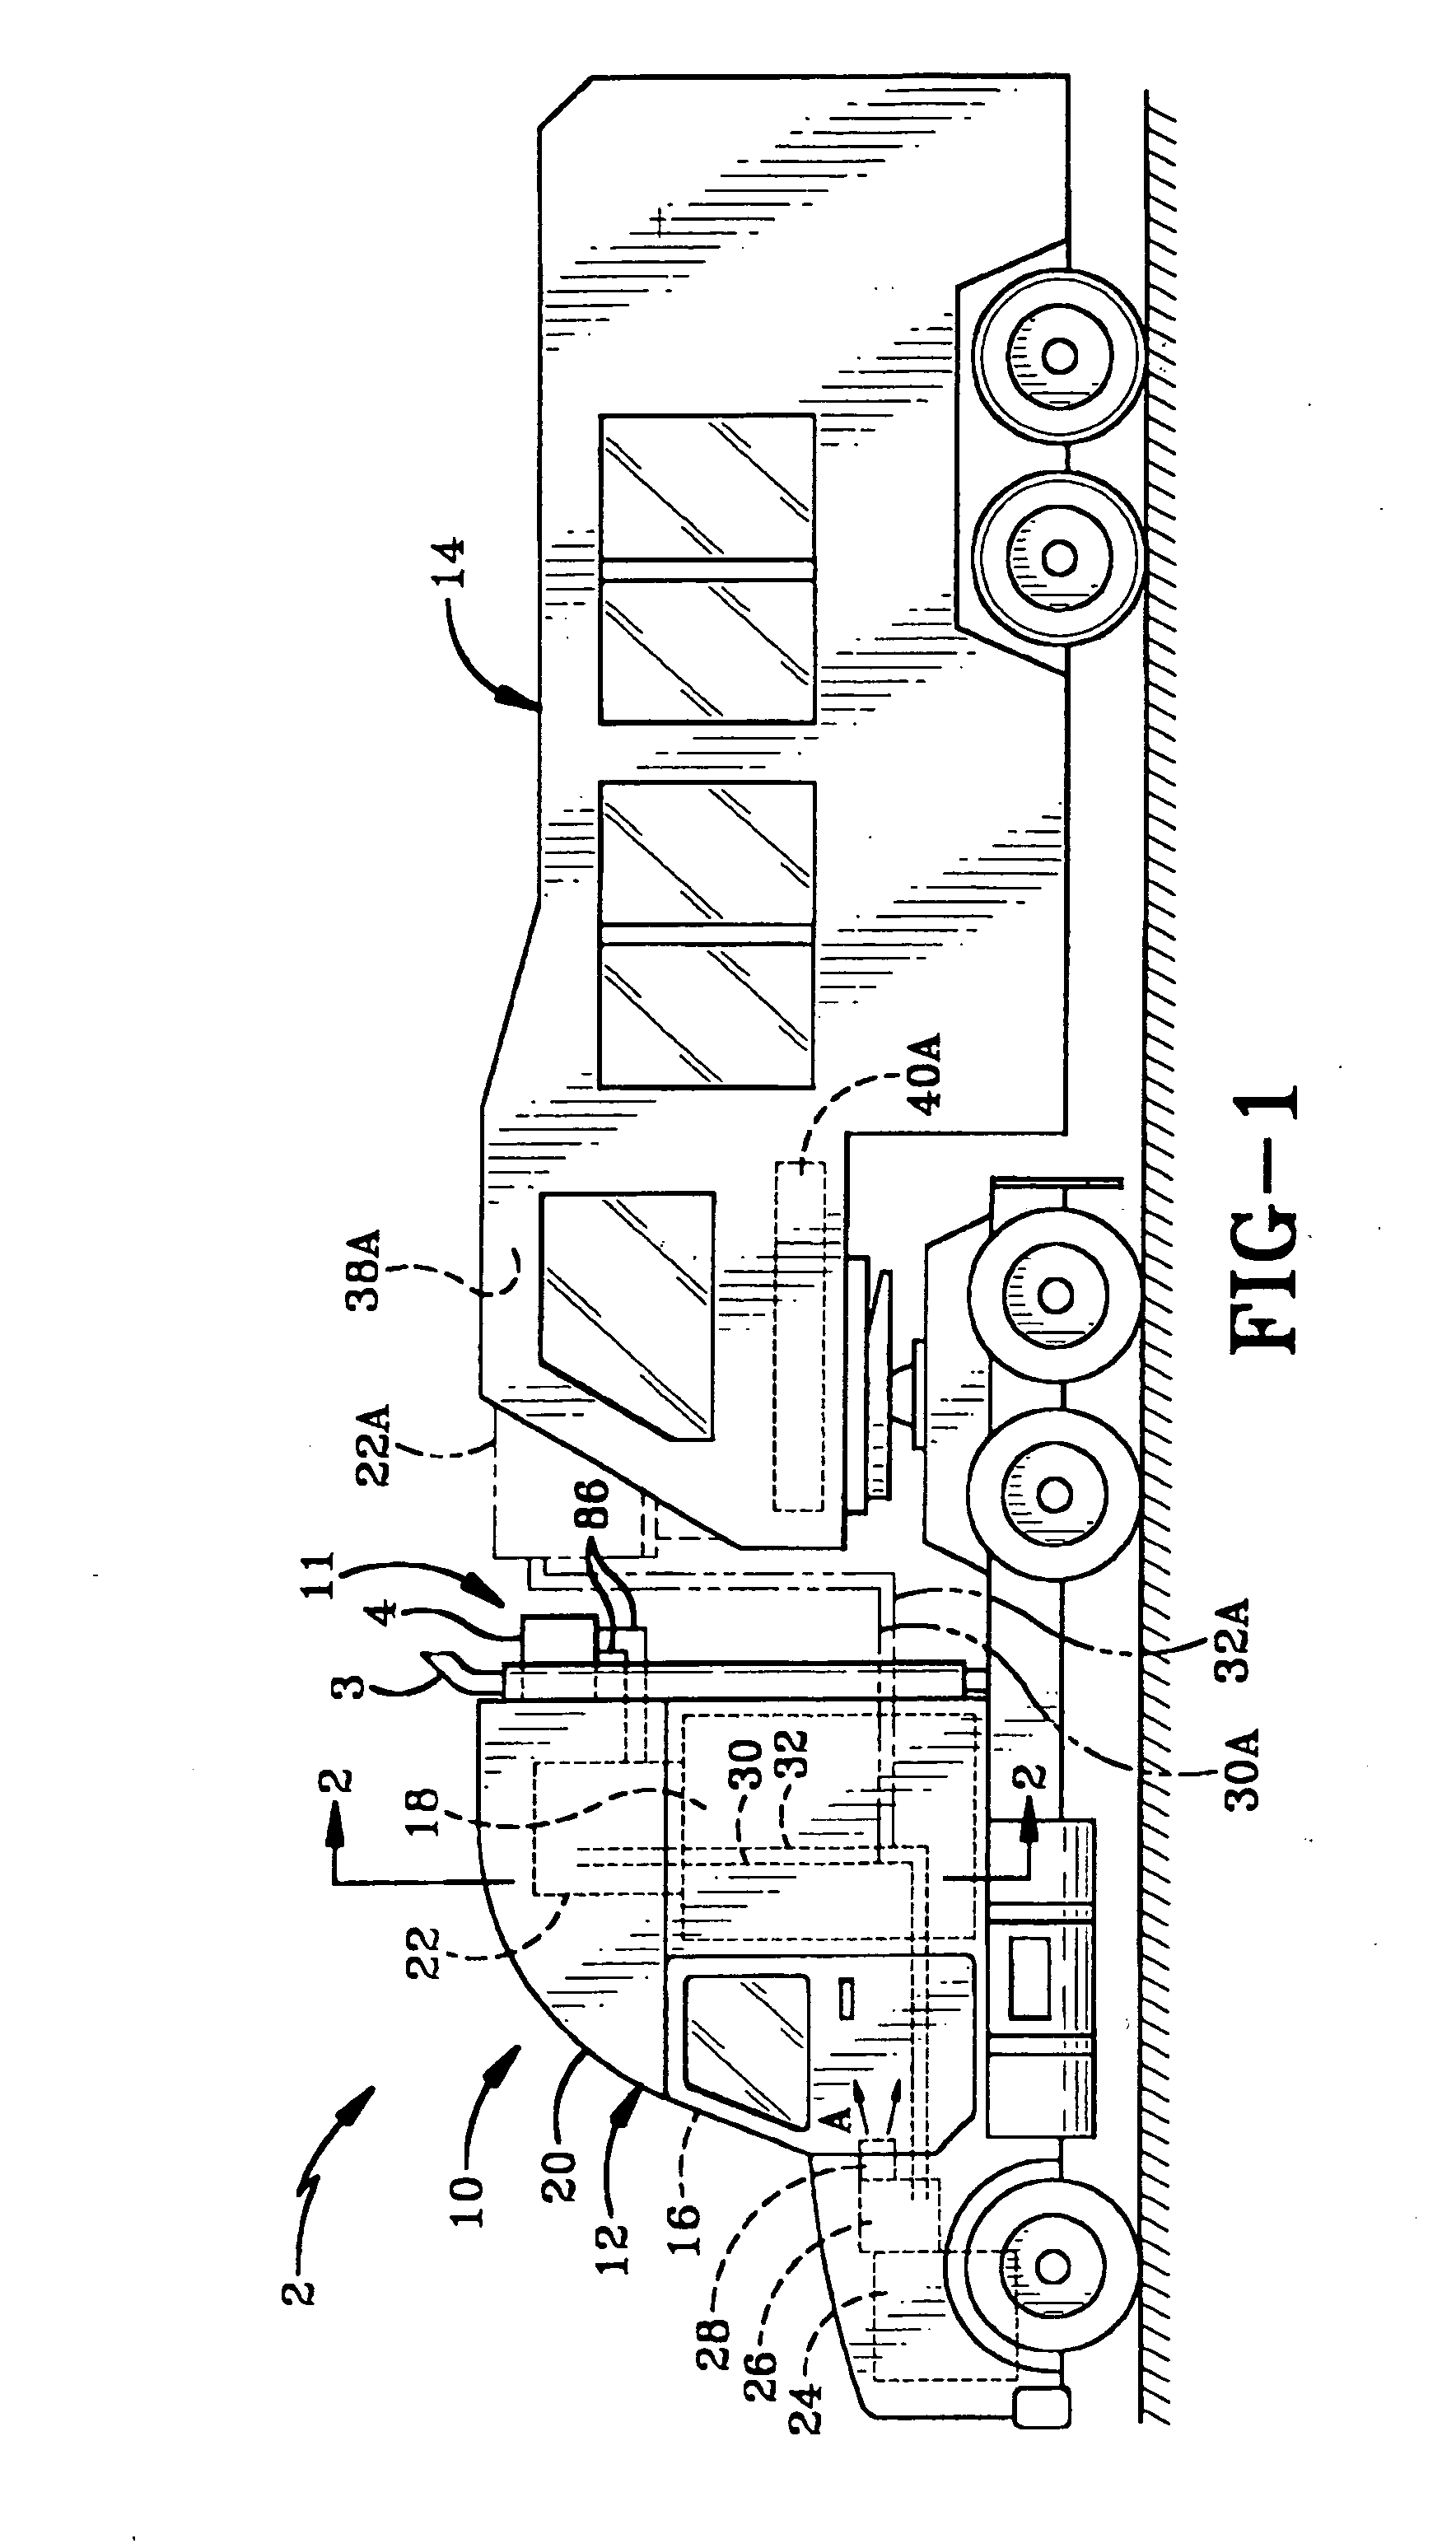 Method and apparatus for thermal storage using heat pipes